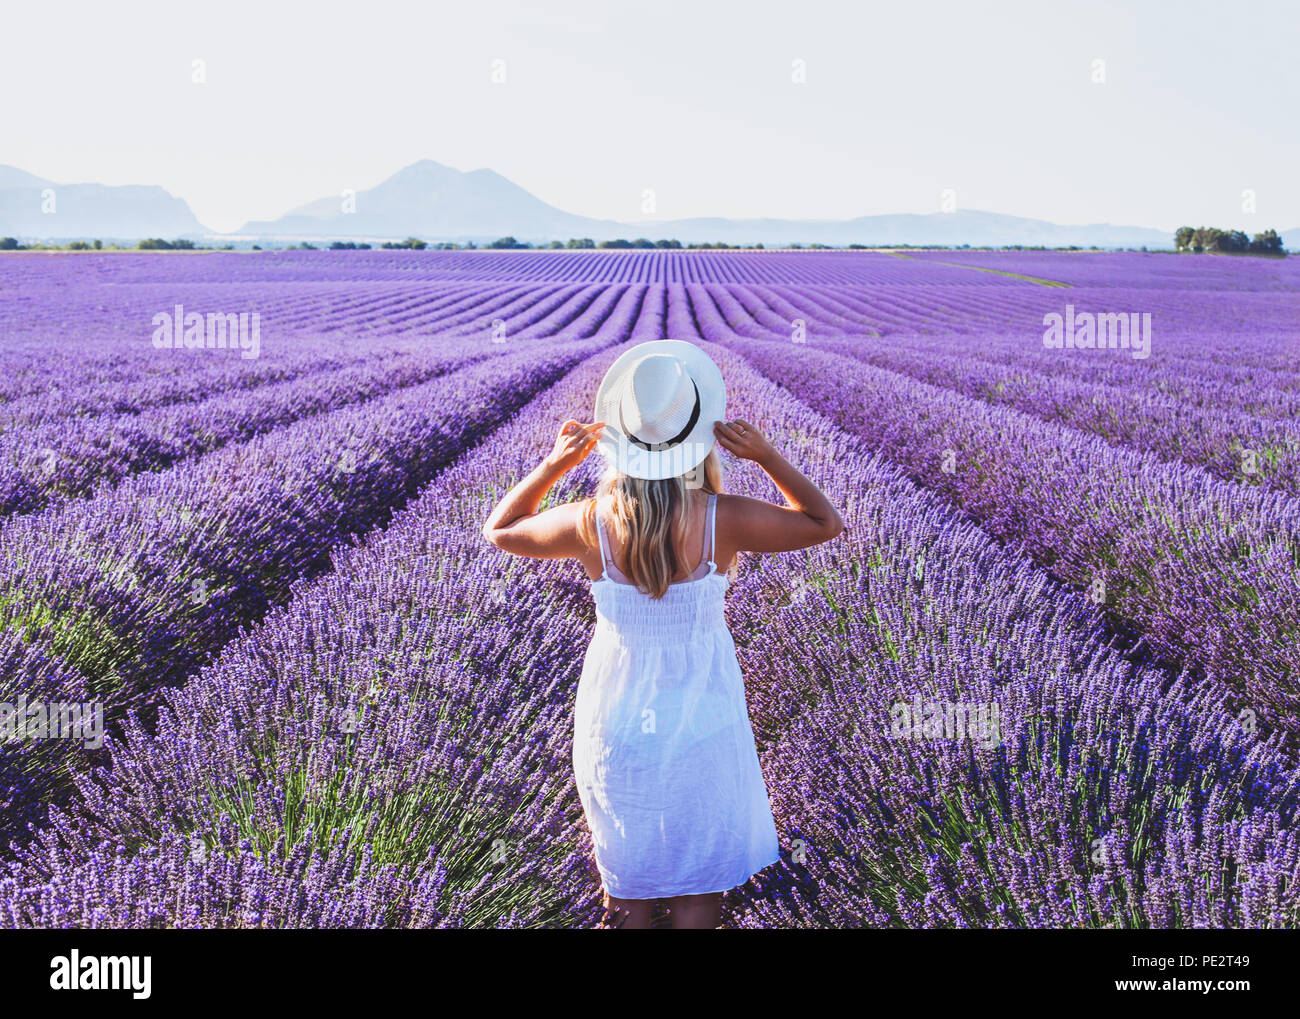 dream and inspiration, summer happy woman in romantic white dress enjoying nature in lavender flowers fields Stock Photo